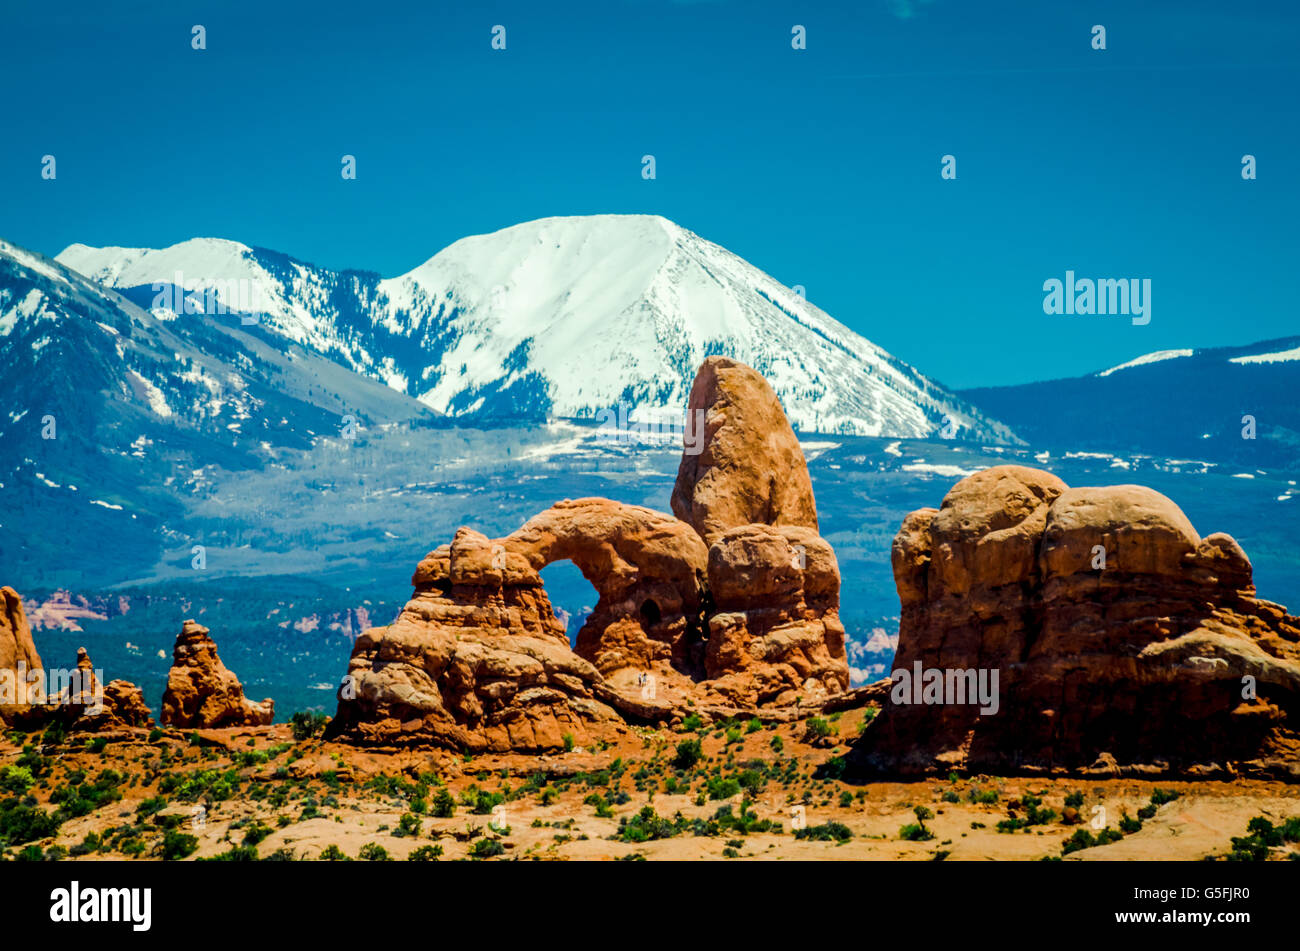 Snowy mountain in the background from Arches National Park in wonderful Utah, during spring. Stock Photo